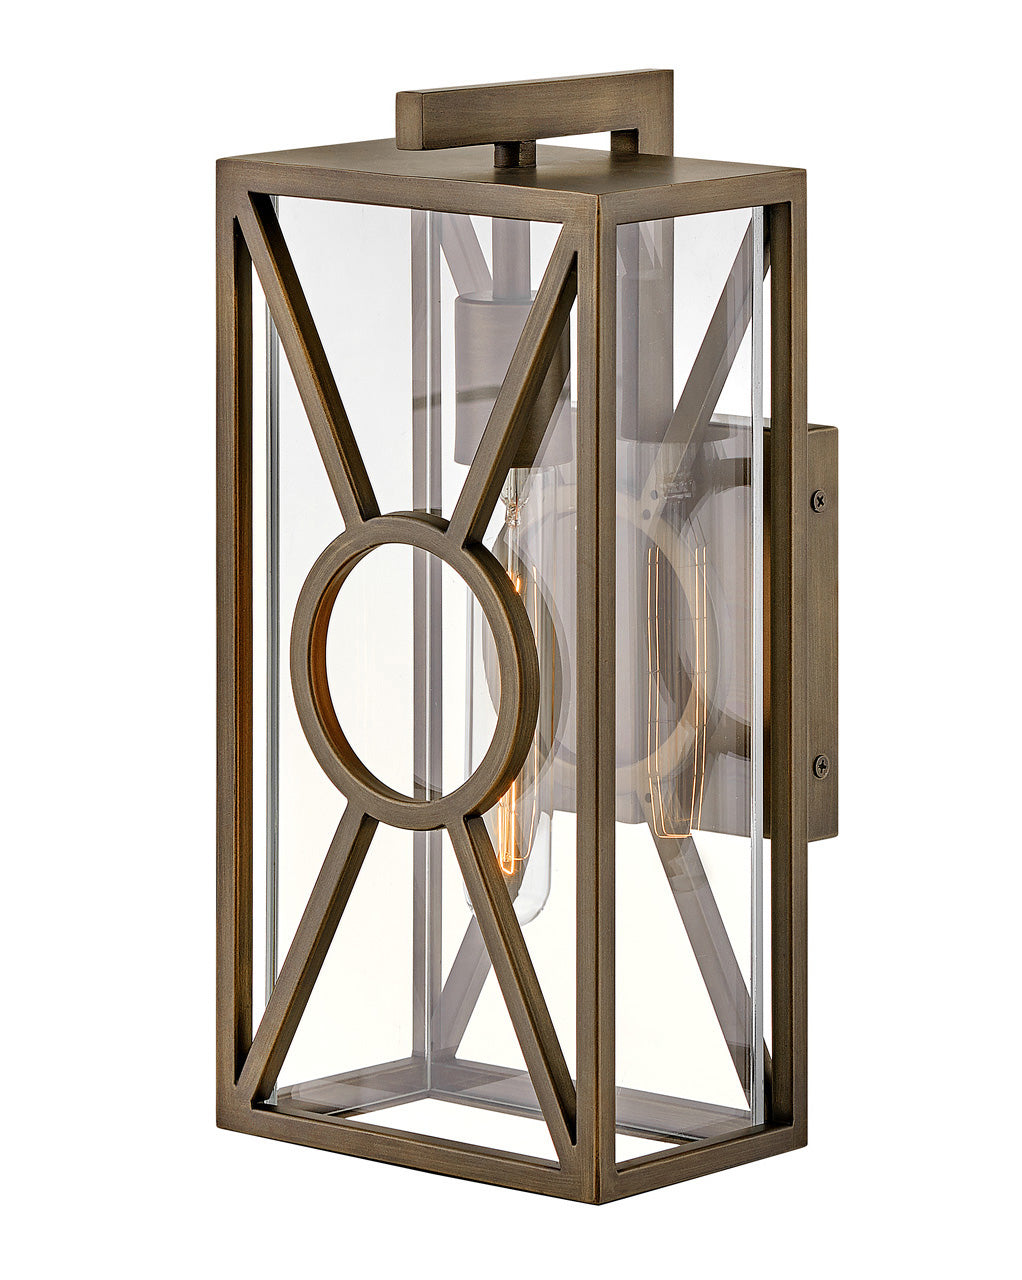 OUTDOOR BRIXTON Wall Mount Lantern Outdoor l Wall Hinkley Burnished Bronze 6.0x6.75x14.0 